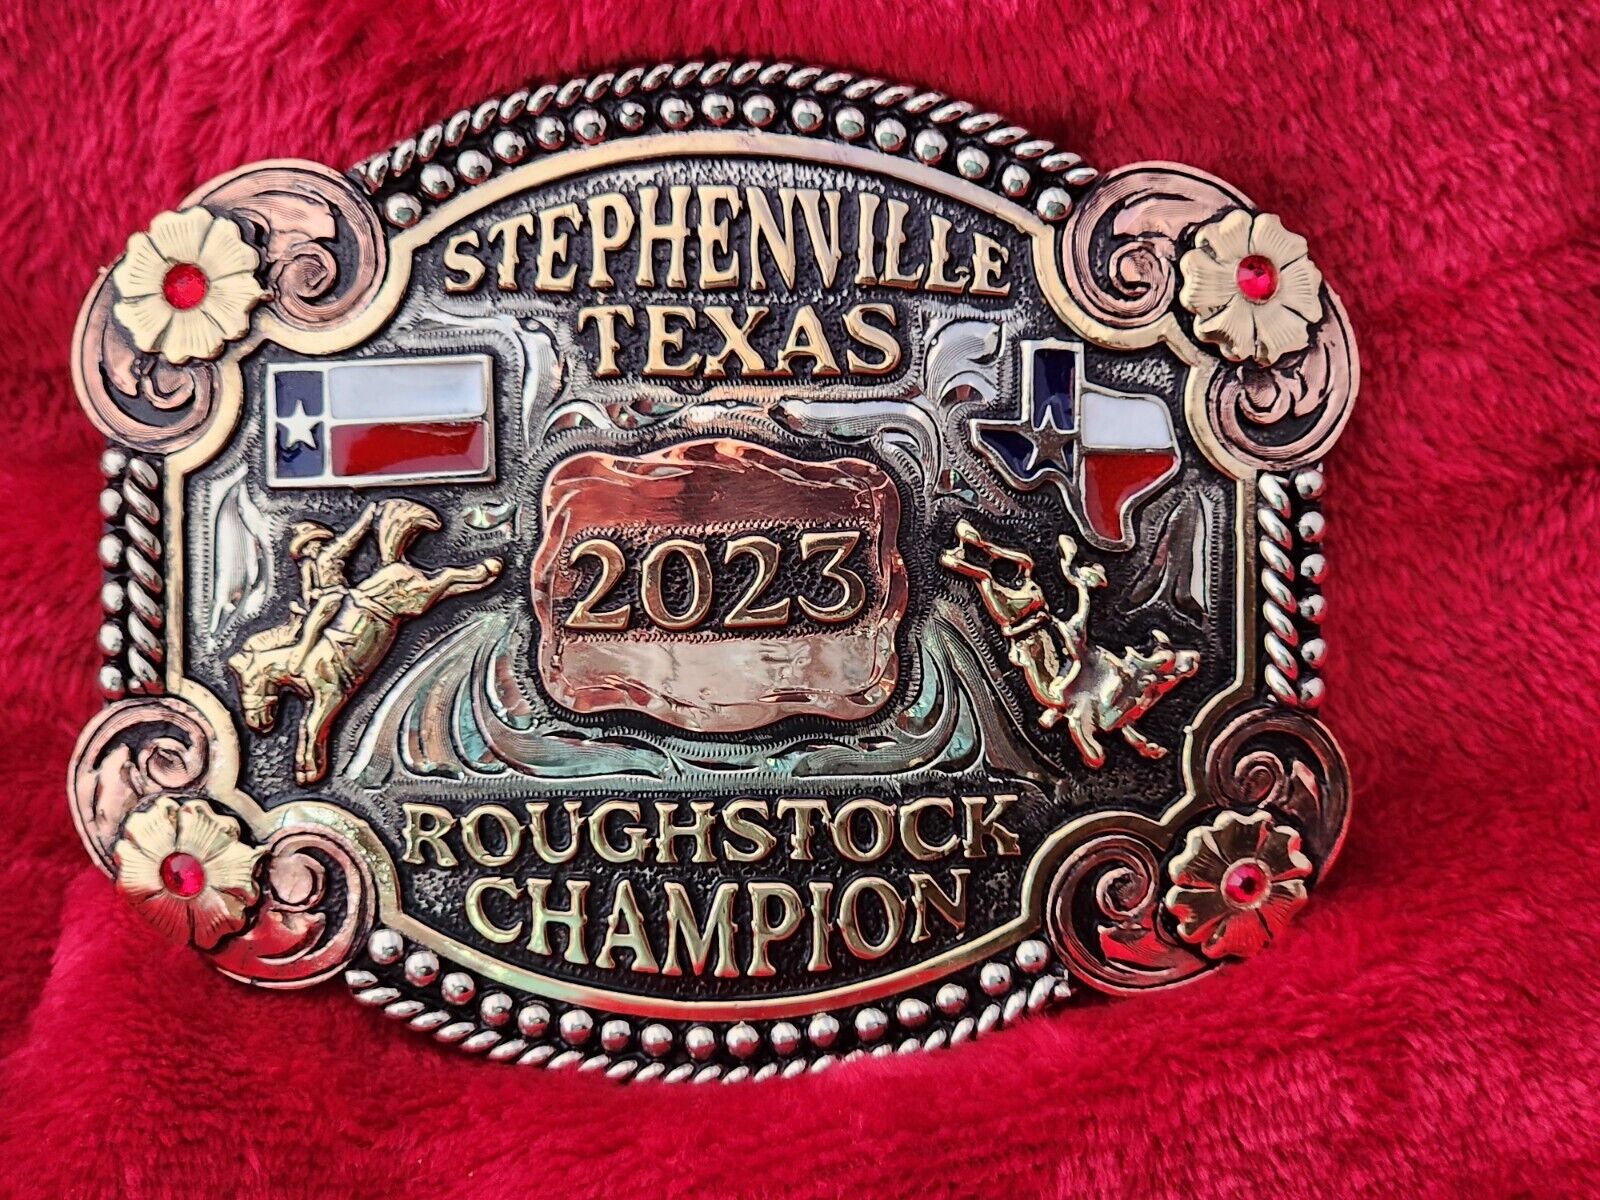 RODEO ALL AROUND CHAMPION TROPHY BUCKLE☆PRO☆STEPHENVILLE TEXAS☆2023☆RARE☆91